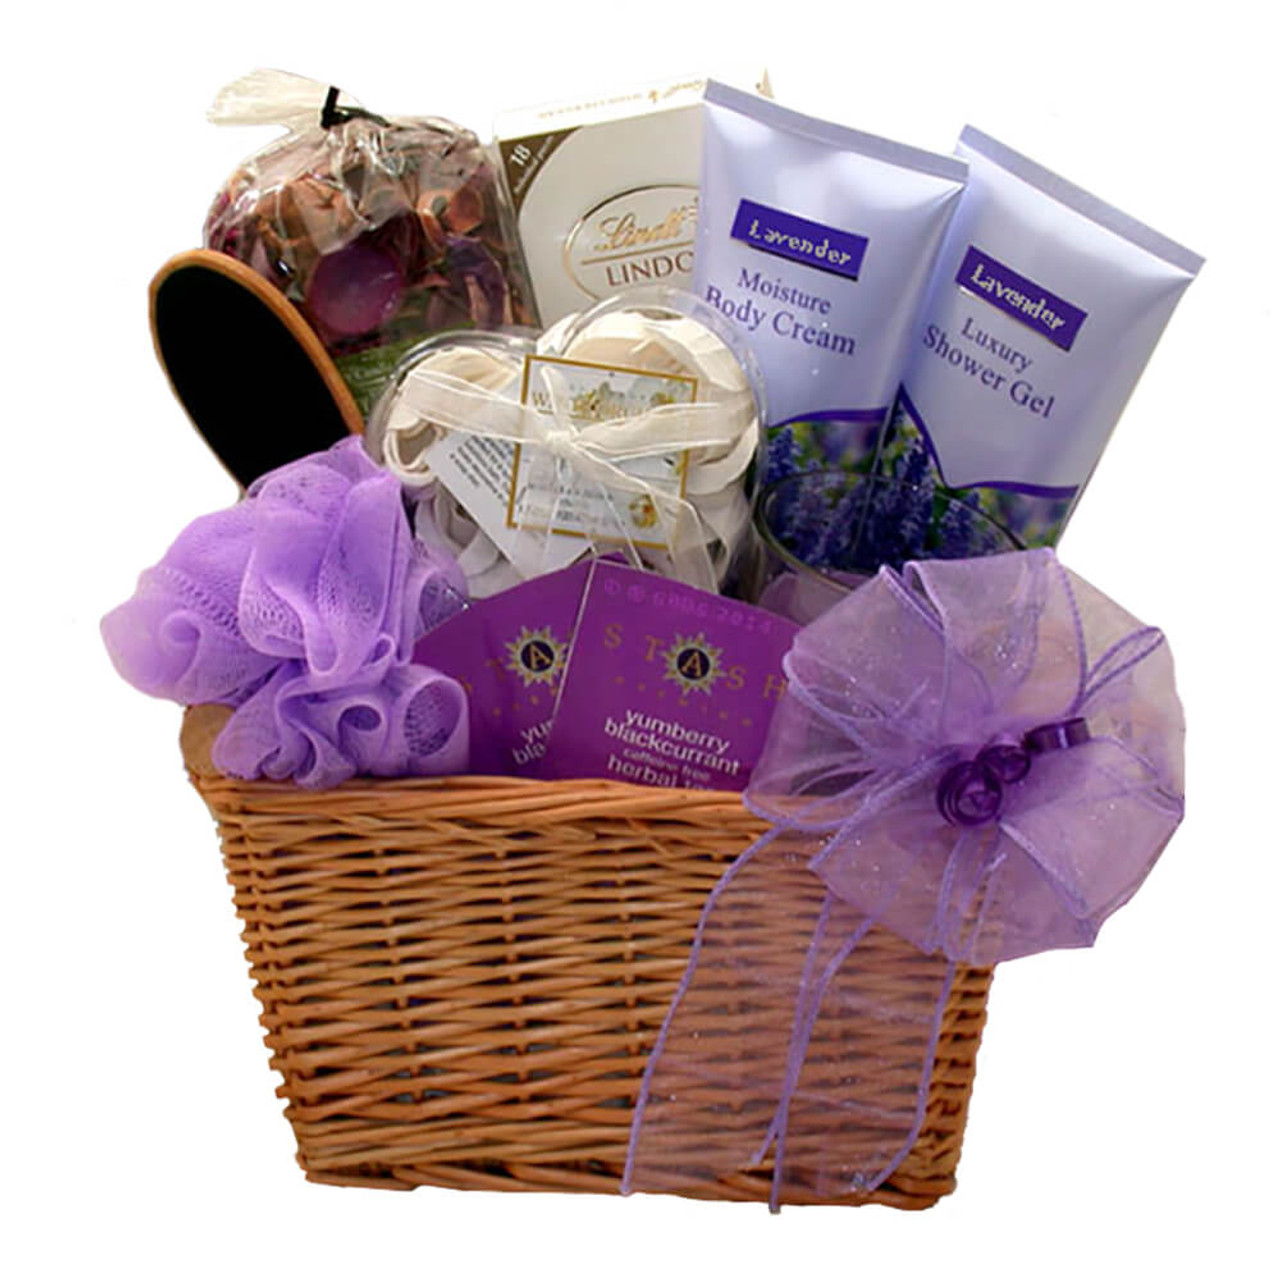 GBDS Get Well Gift Of Anti-Stress & Relaxation Care Pkg- get well soon gifts  for women - 1 Basket